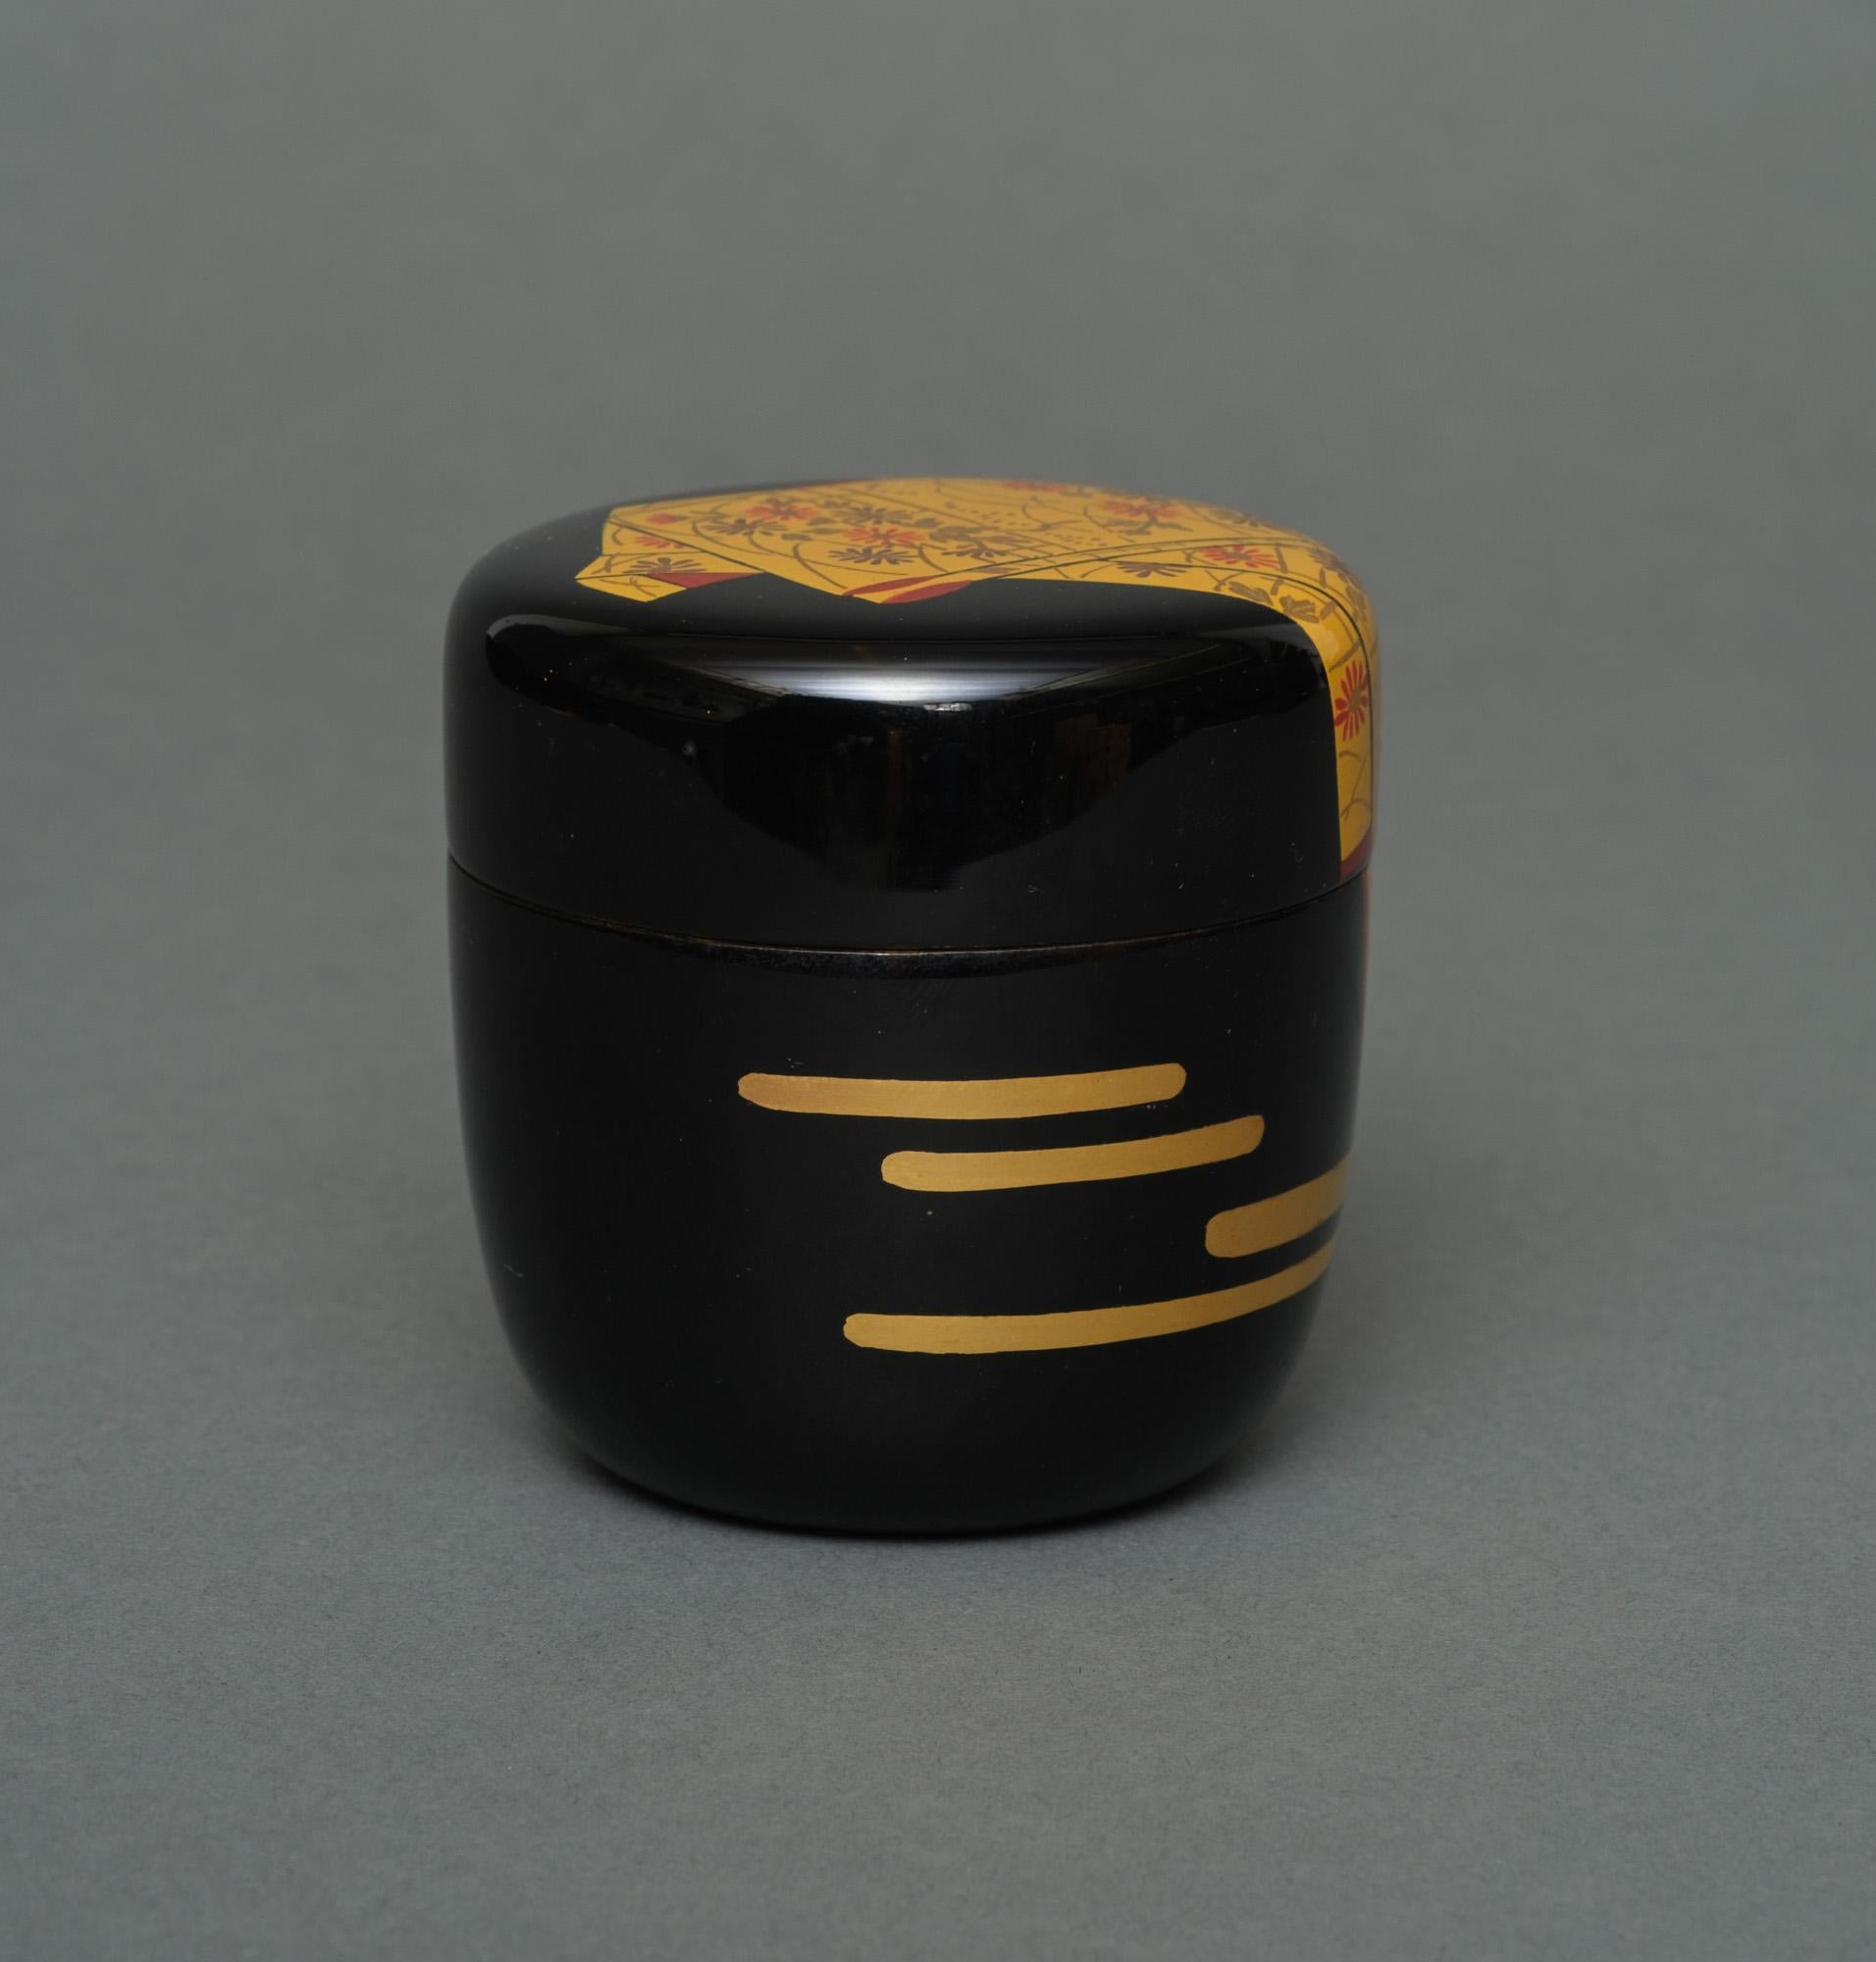 Japanese Lacquer Natsume 棗 with Kimono Design by Takahashi Masayoshi 高橋正良 For Sale 3